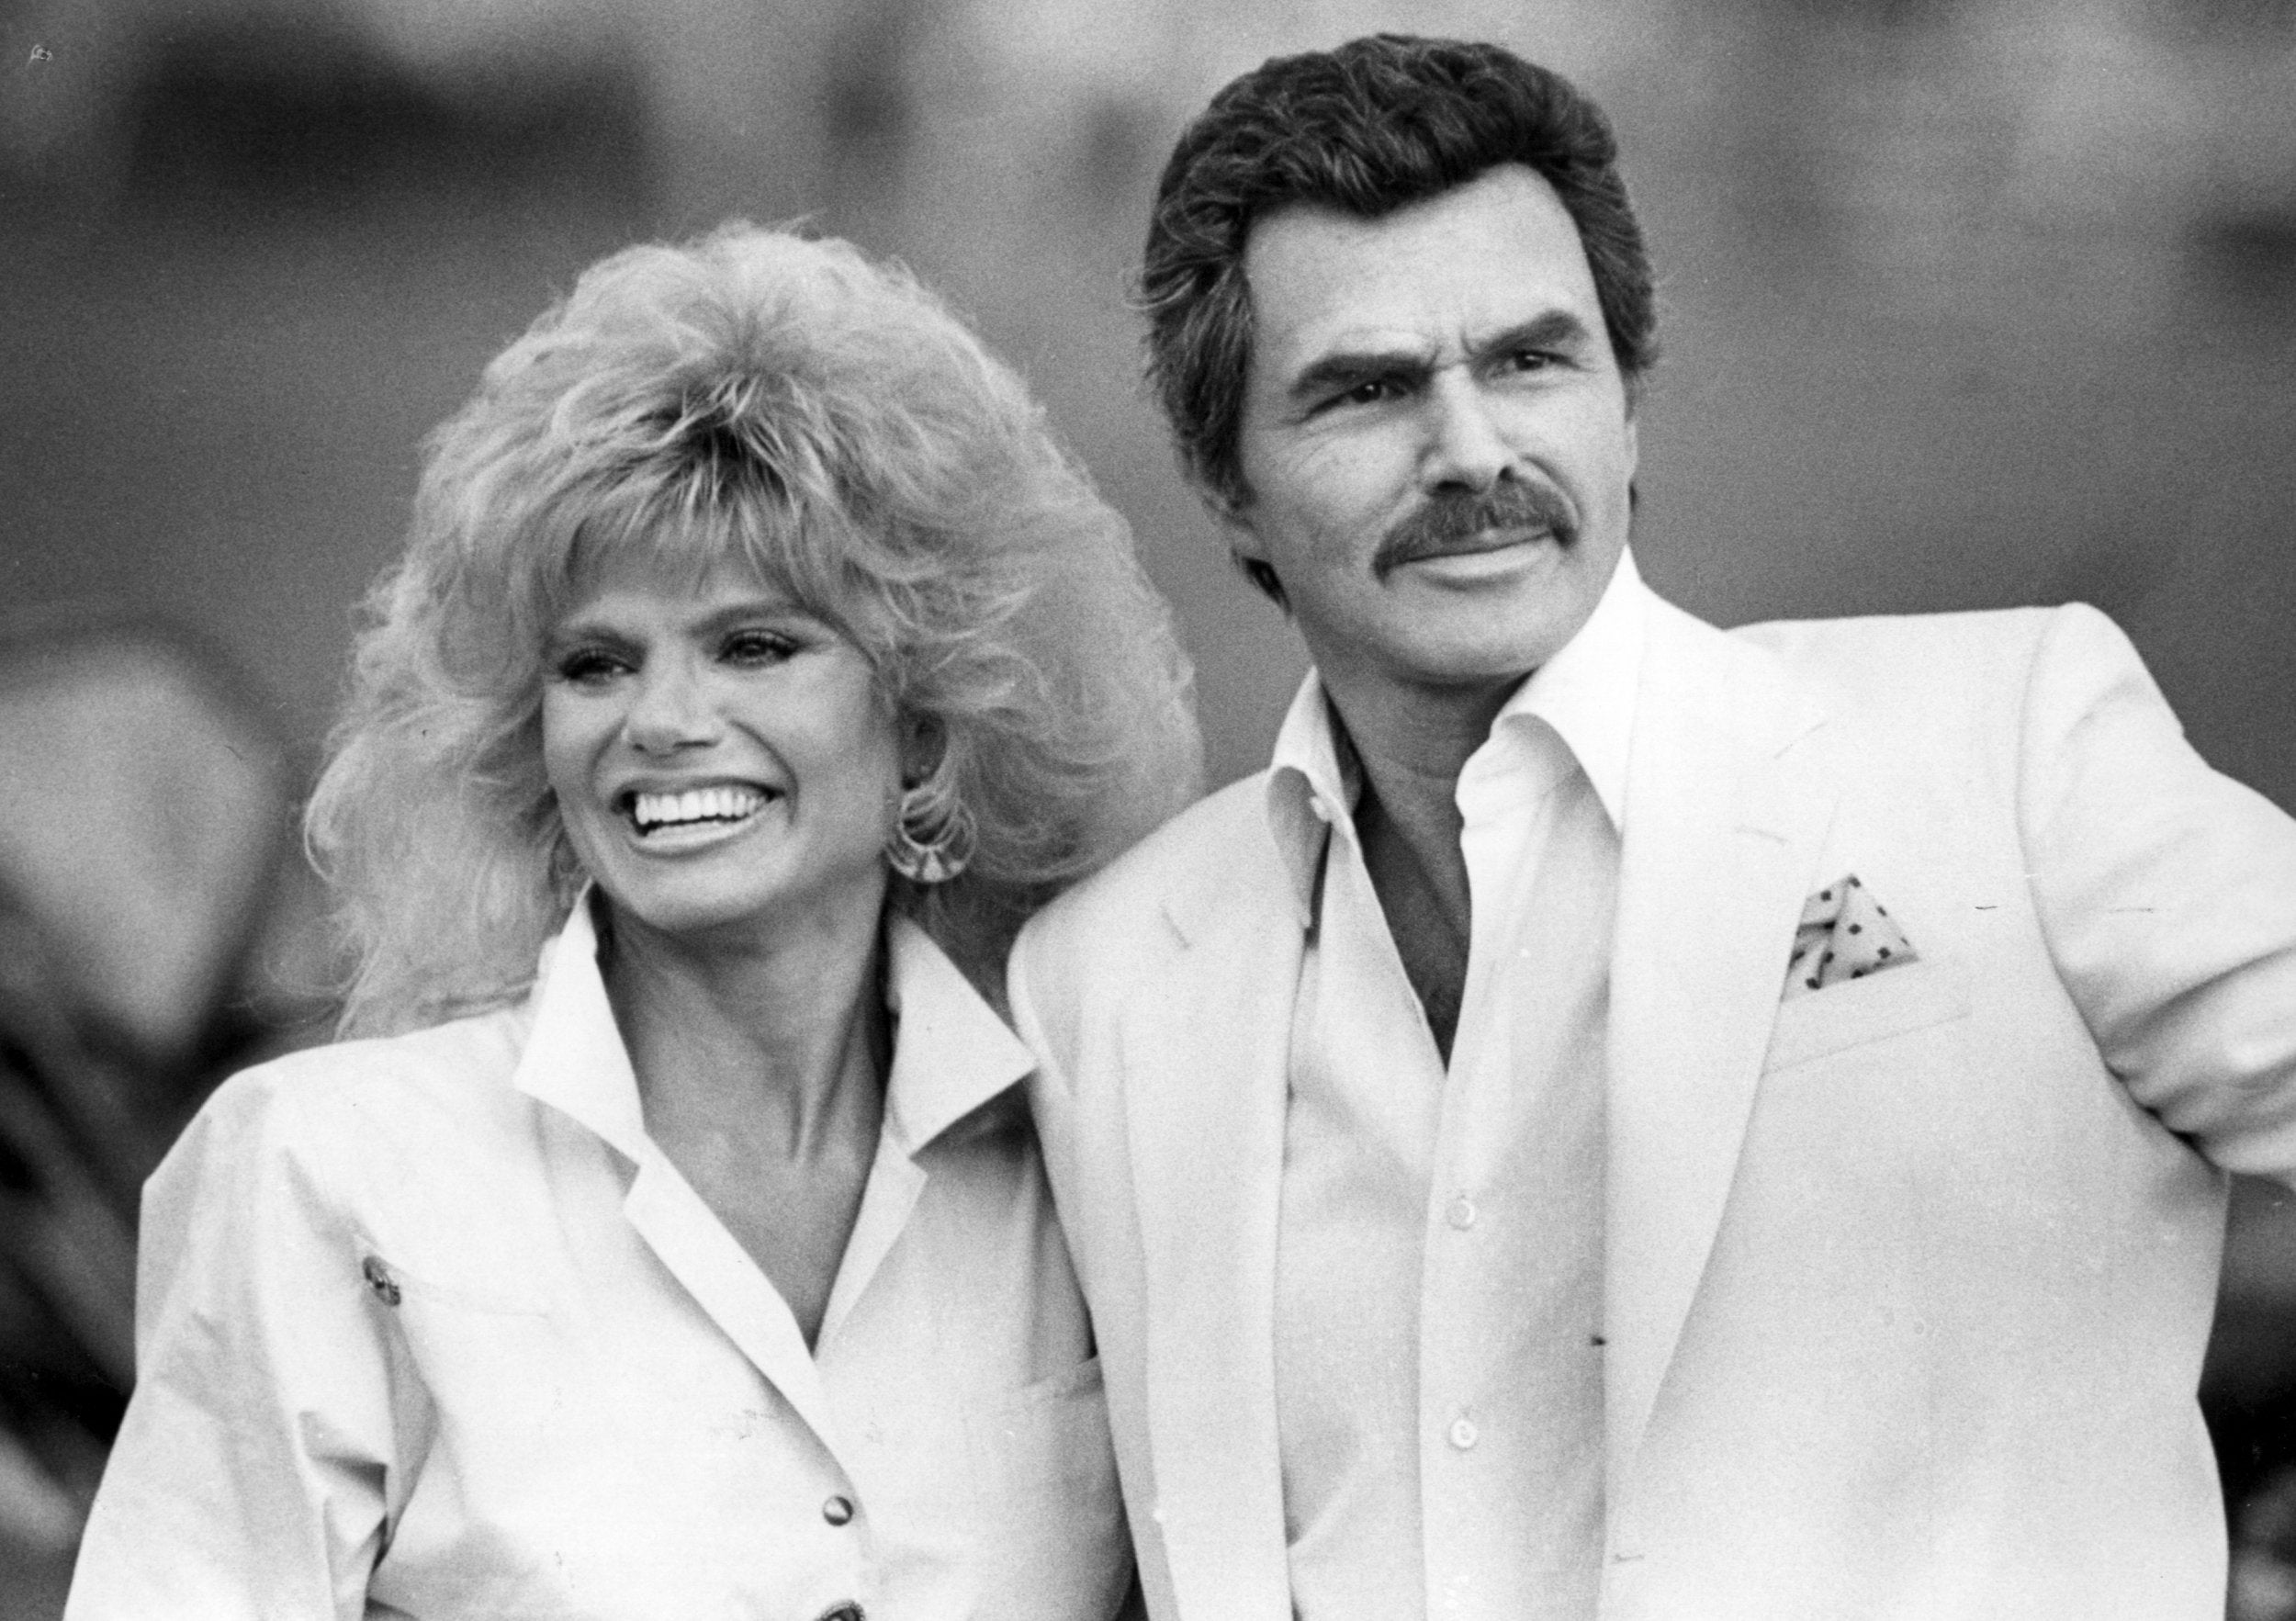 Reynolds and his second wife, Loni Anderson, appear at a polo match in 1987